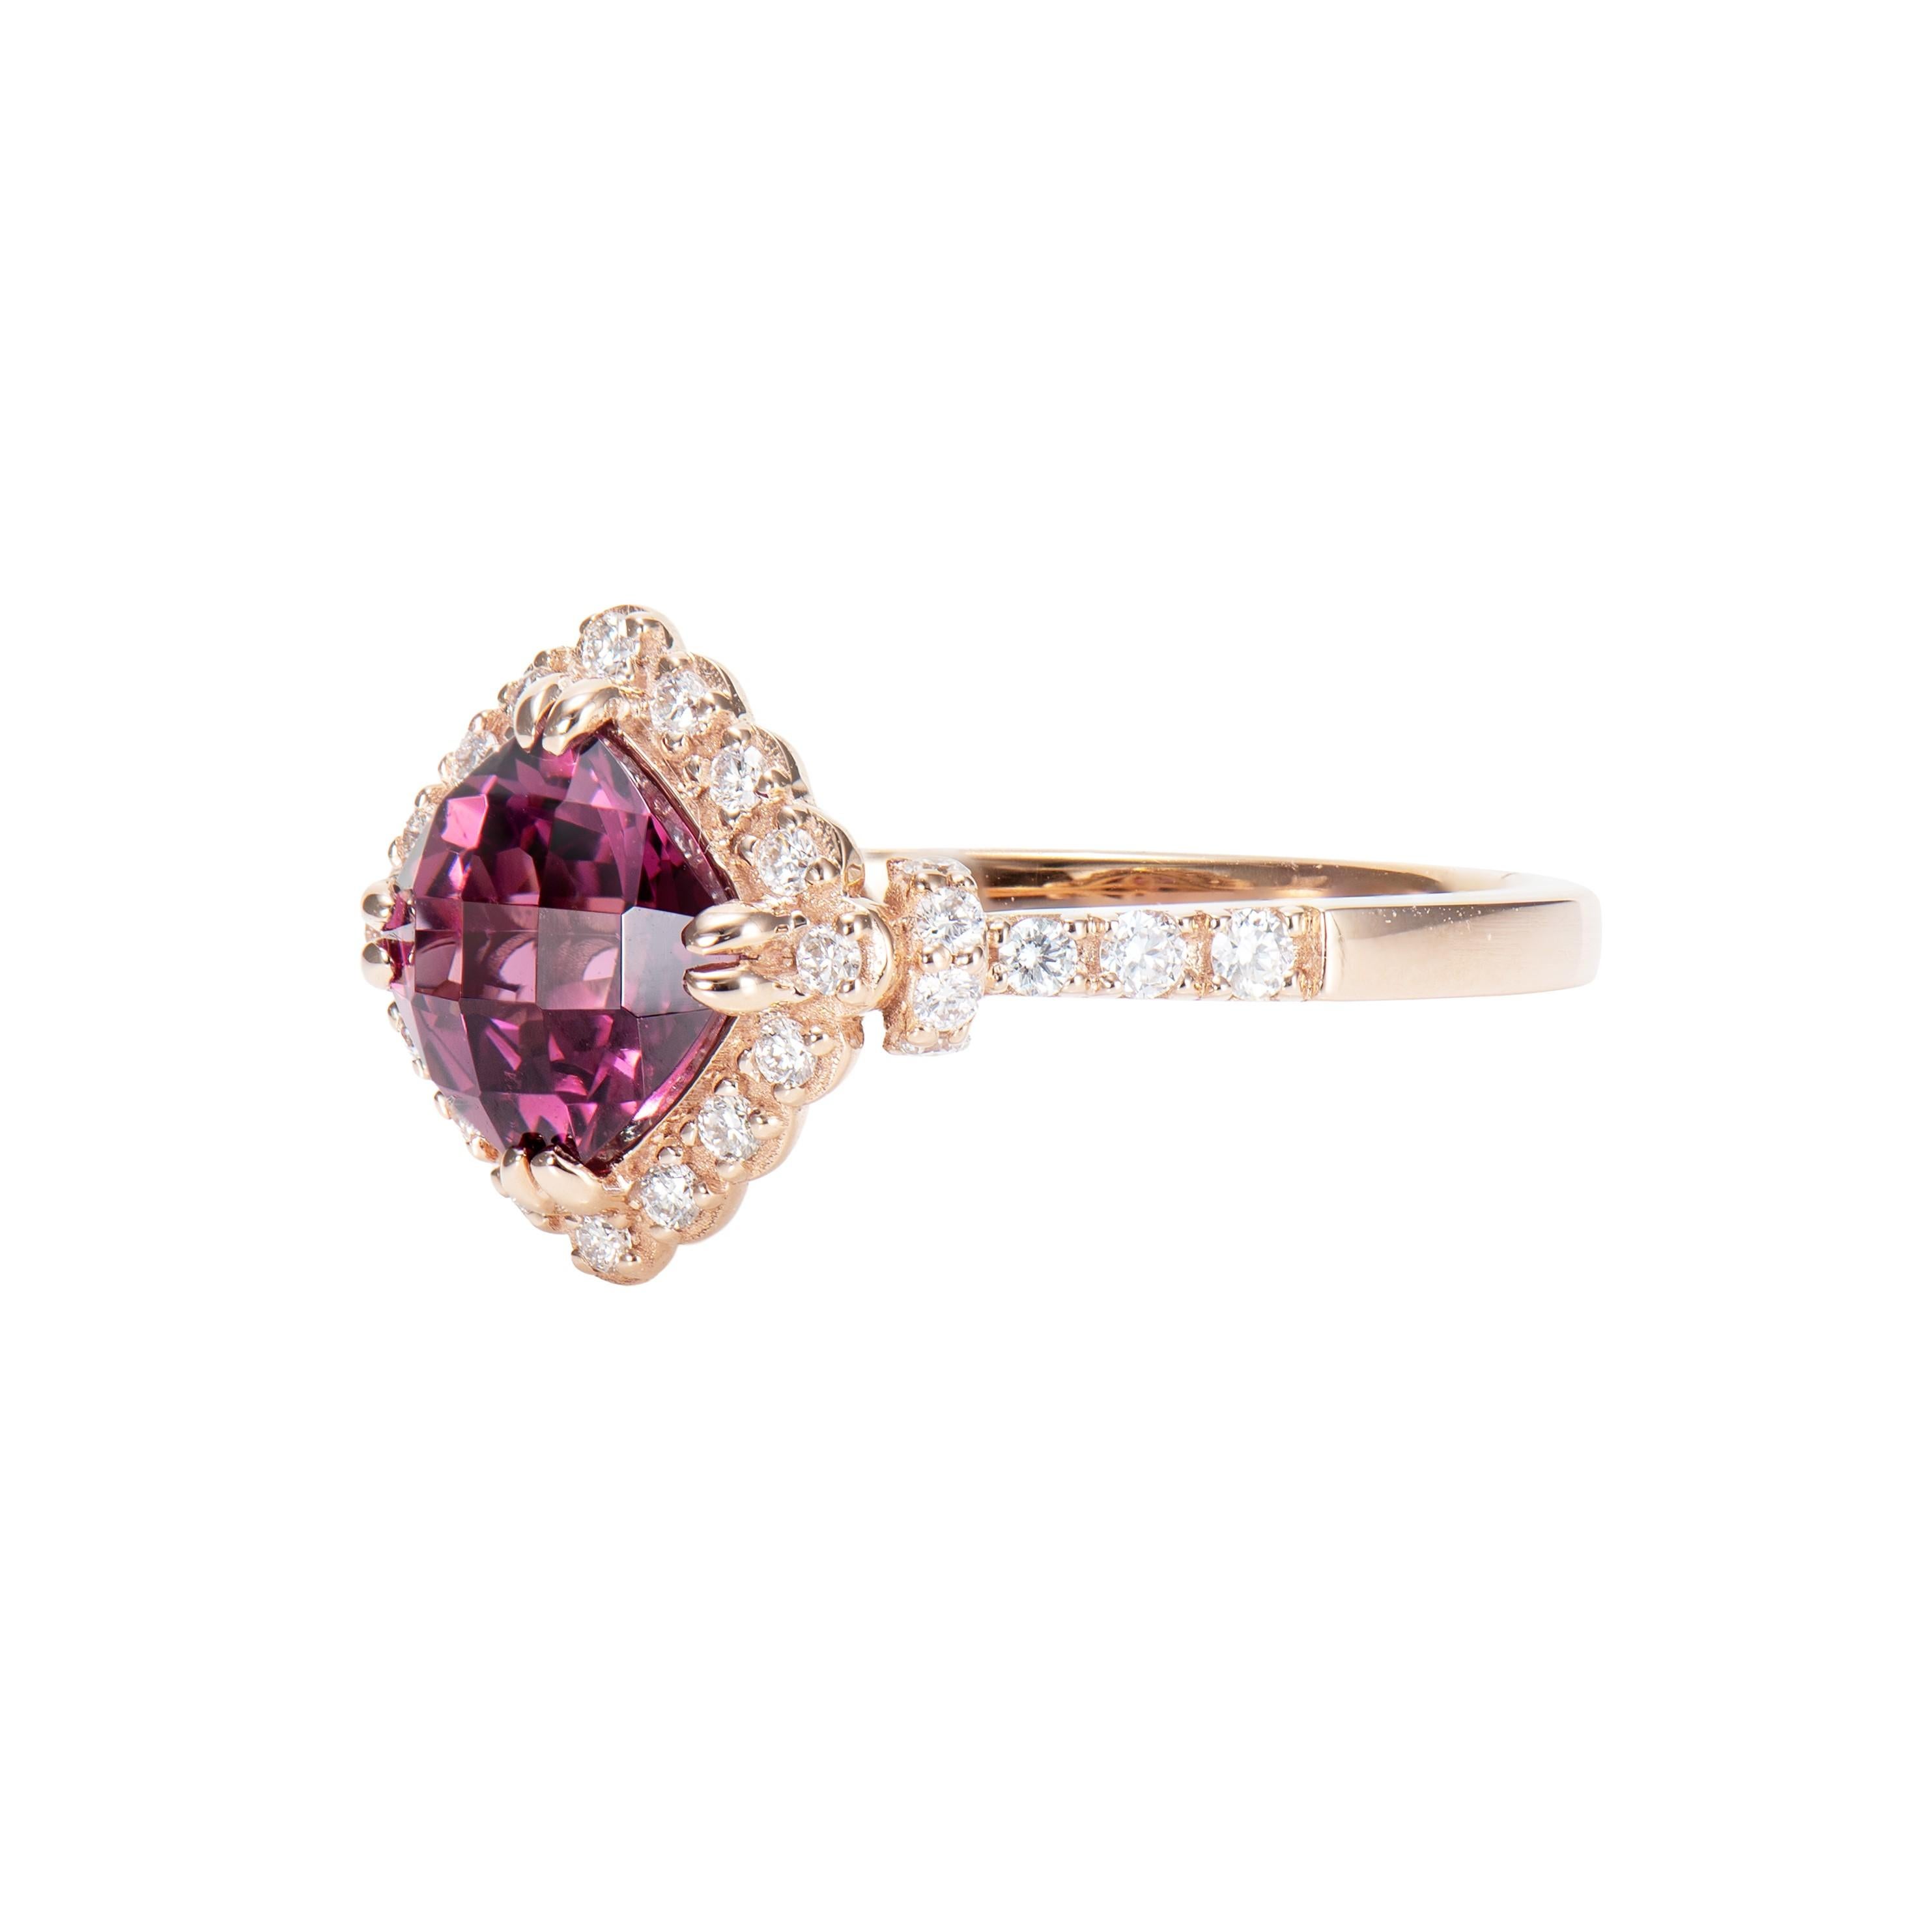 Cushion Cut 1.84 Carat Rhodolite Cocktail Ring in 18 Karat Rose Gold with Diamond. For Sale